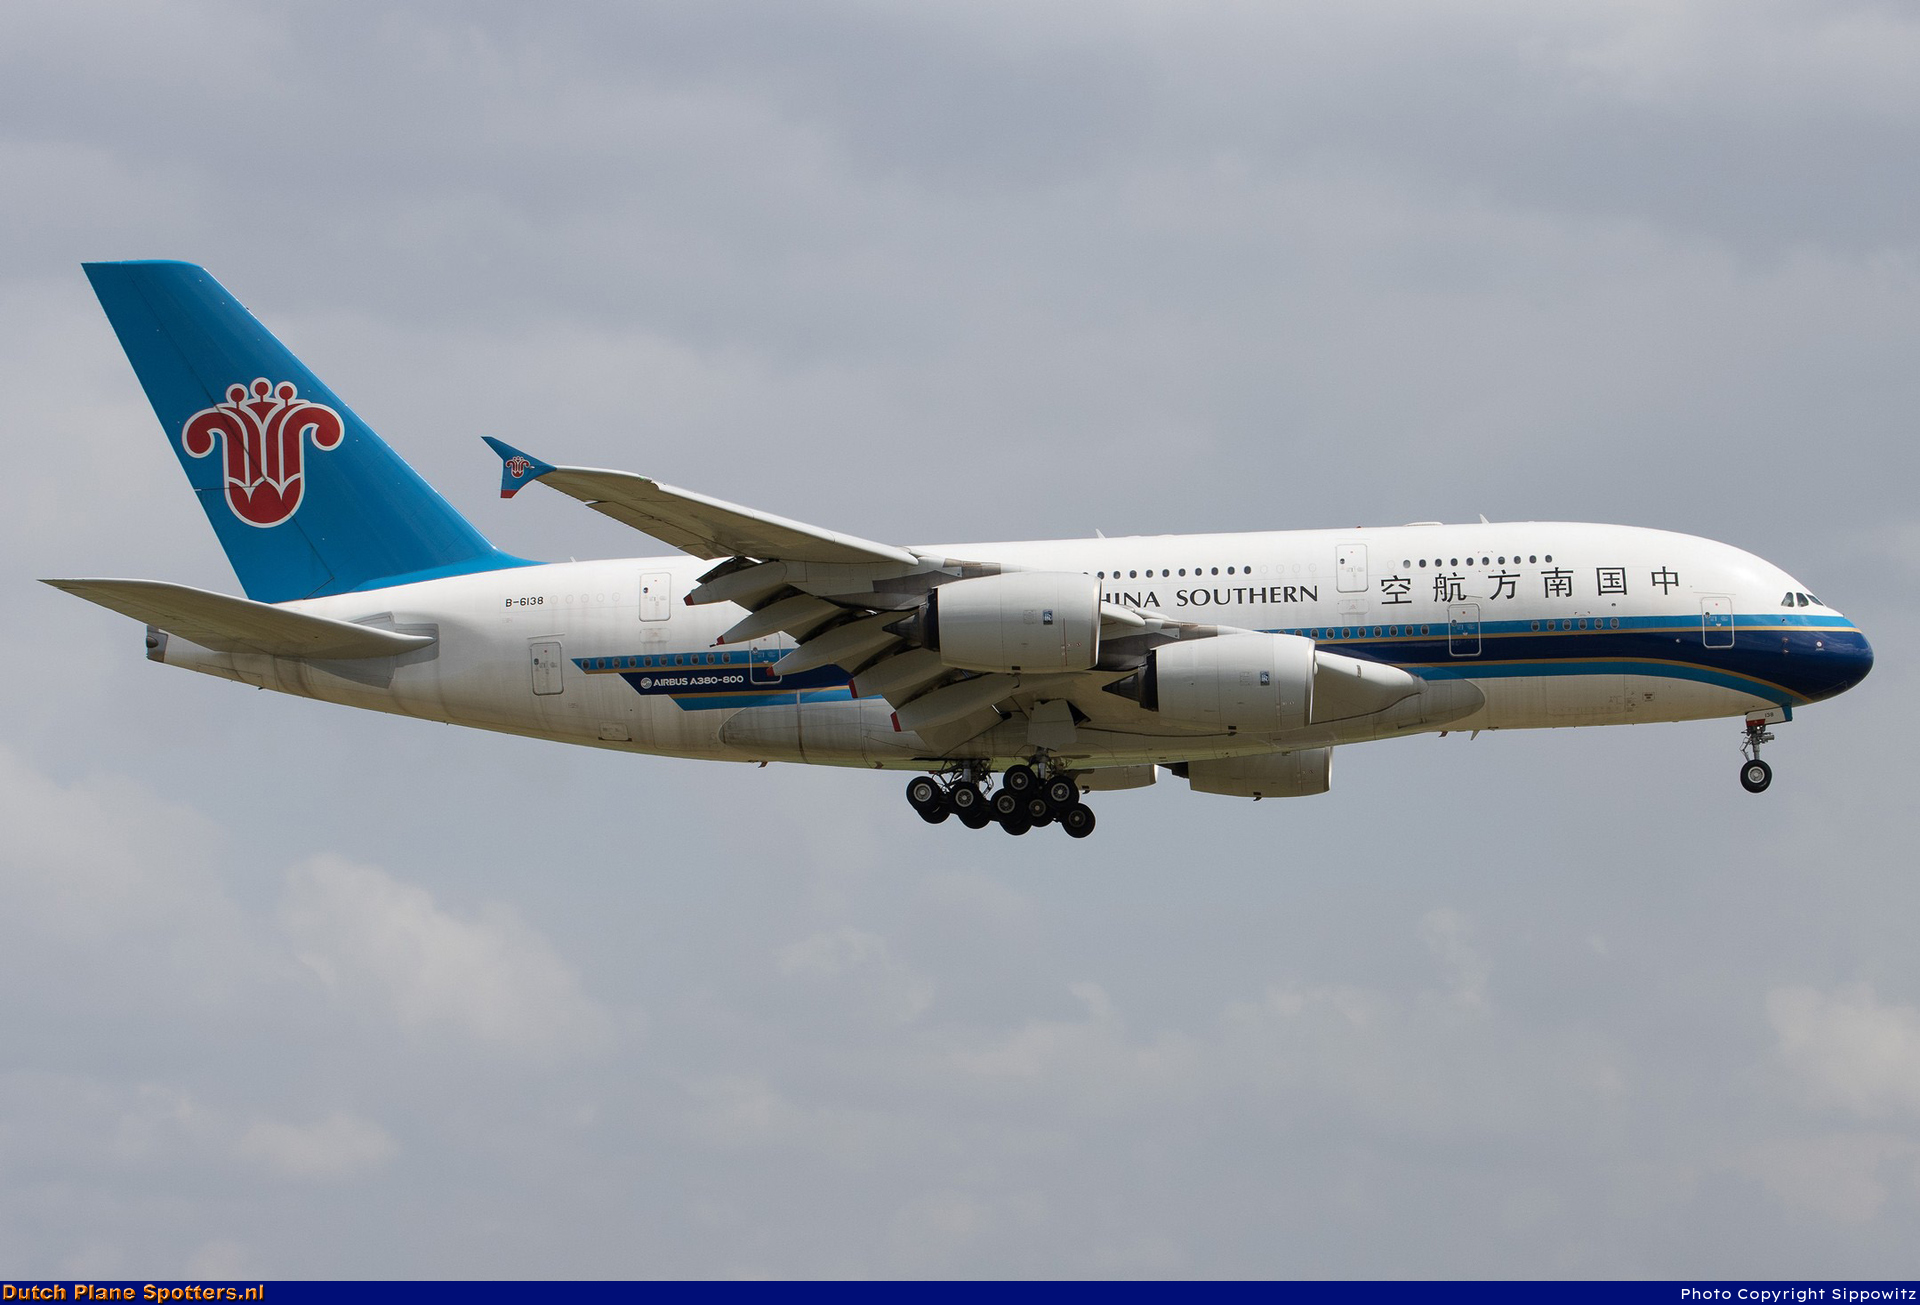 B-6138 Airbus A380-800 China Southern by Sippowitz